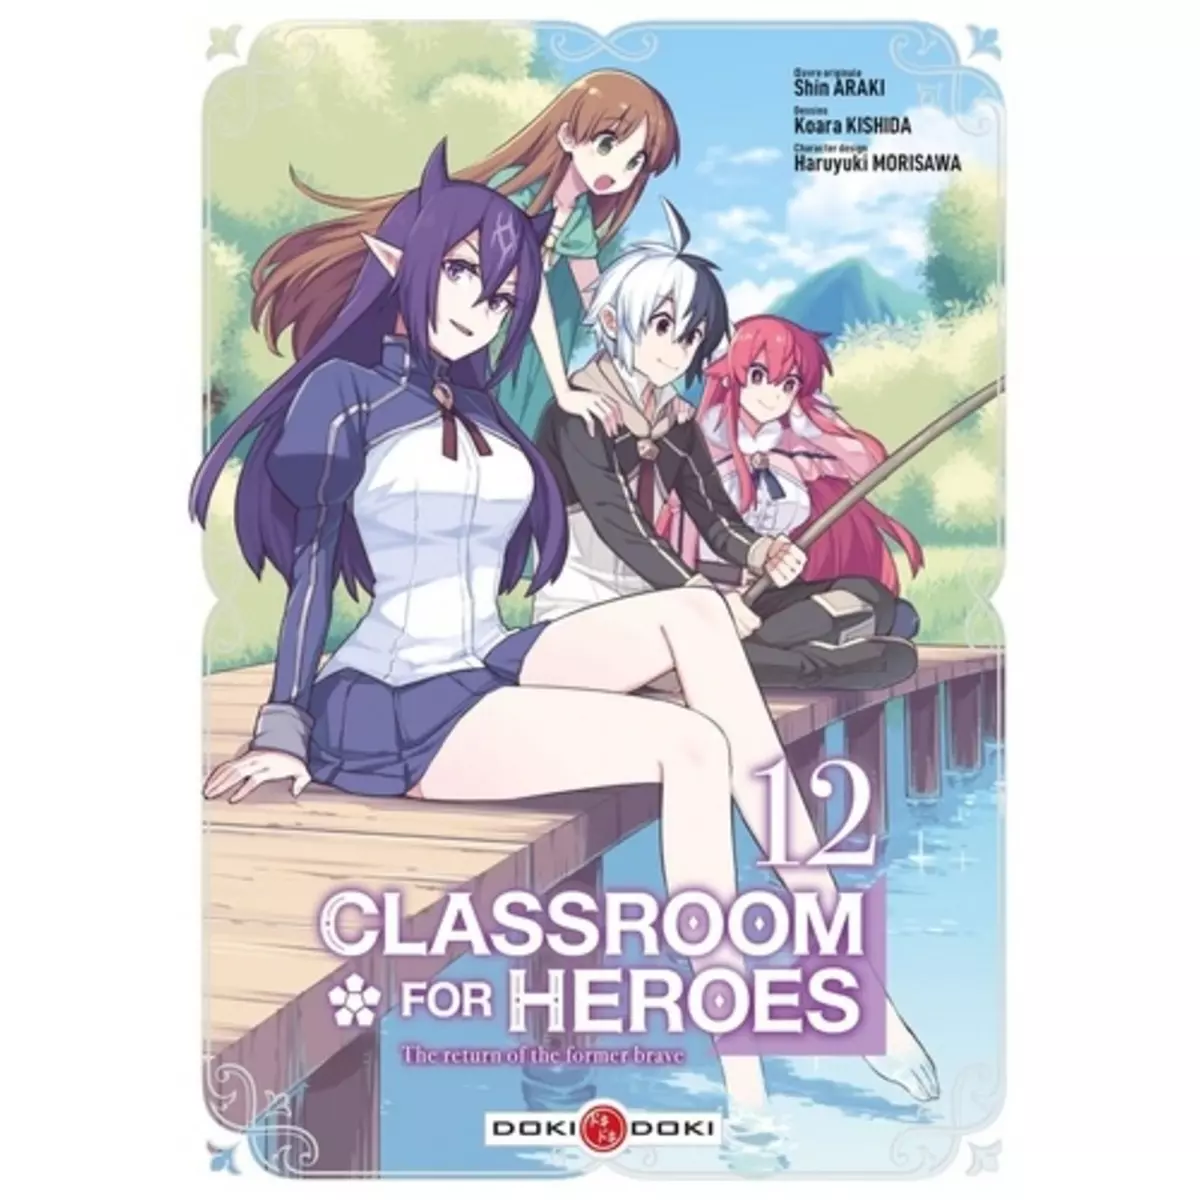  CLASSROOM FOR HEROES - THE RETURN OF THE FORMER BRAVE TOME 12 , Araki Shin